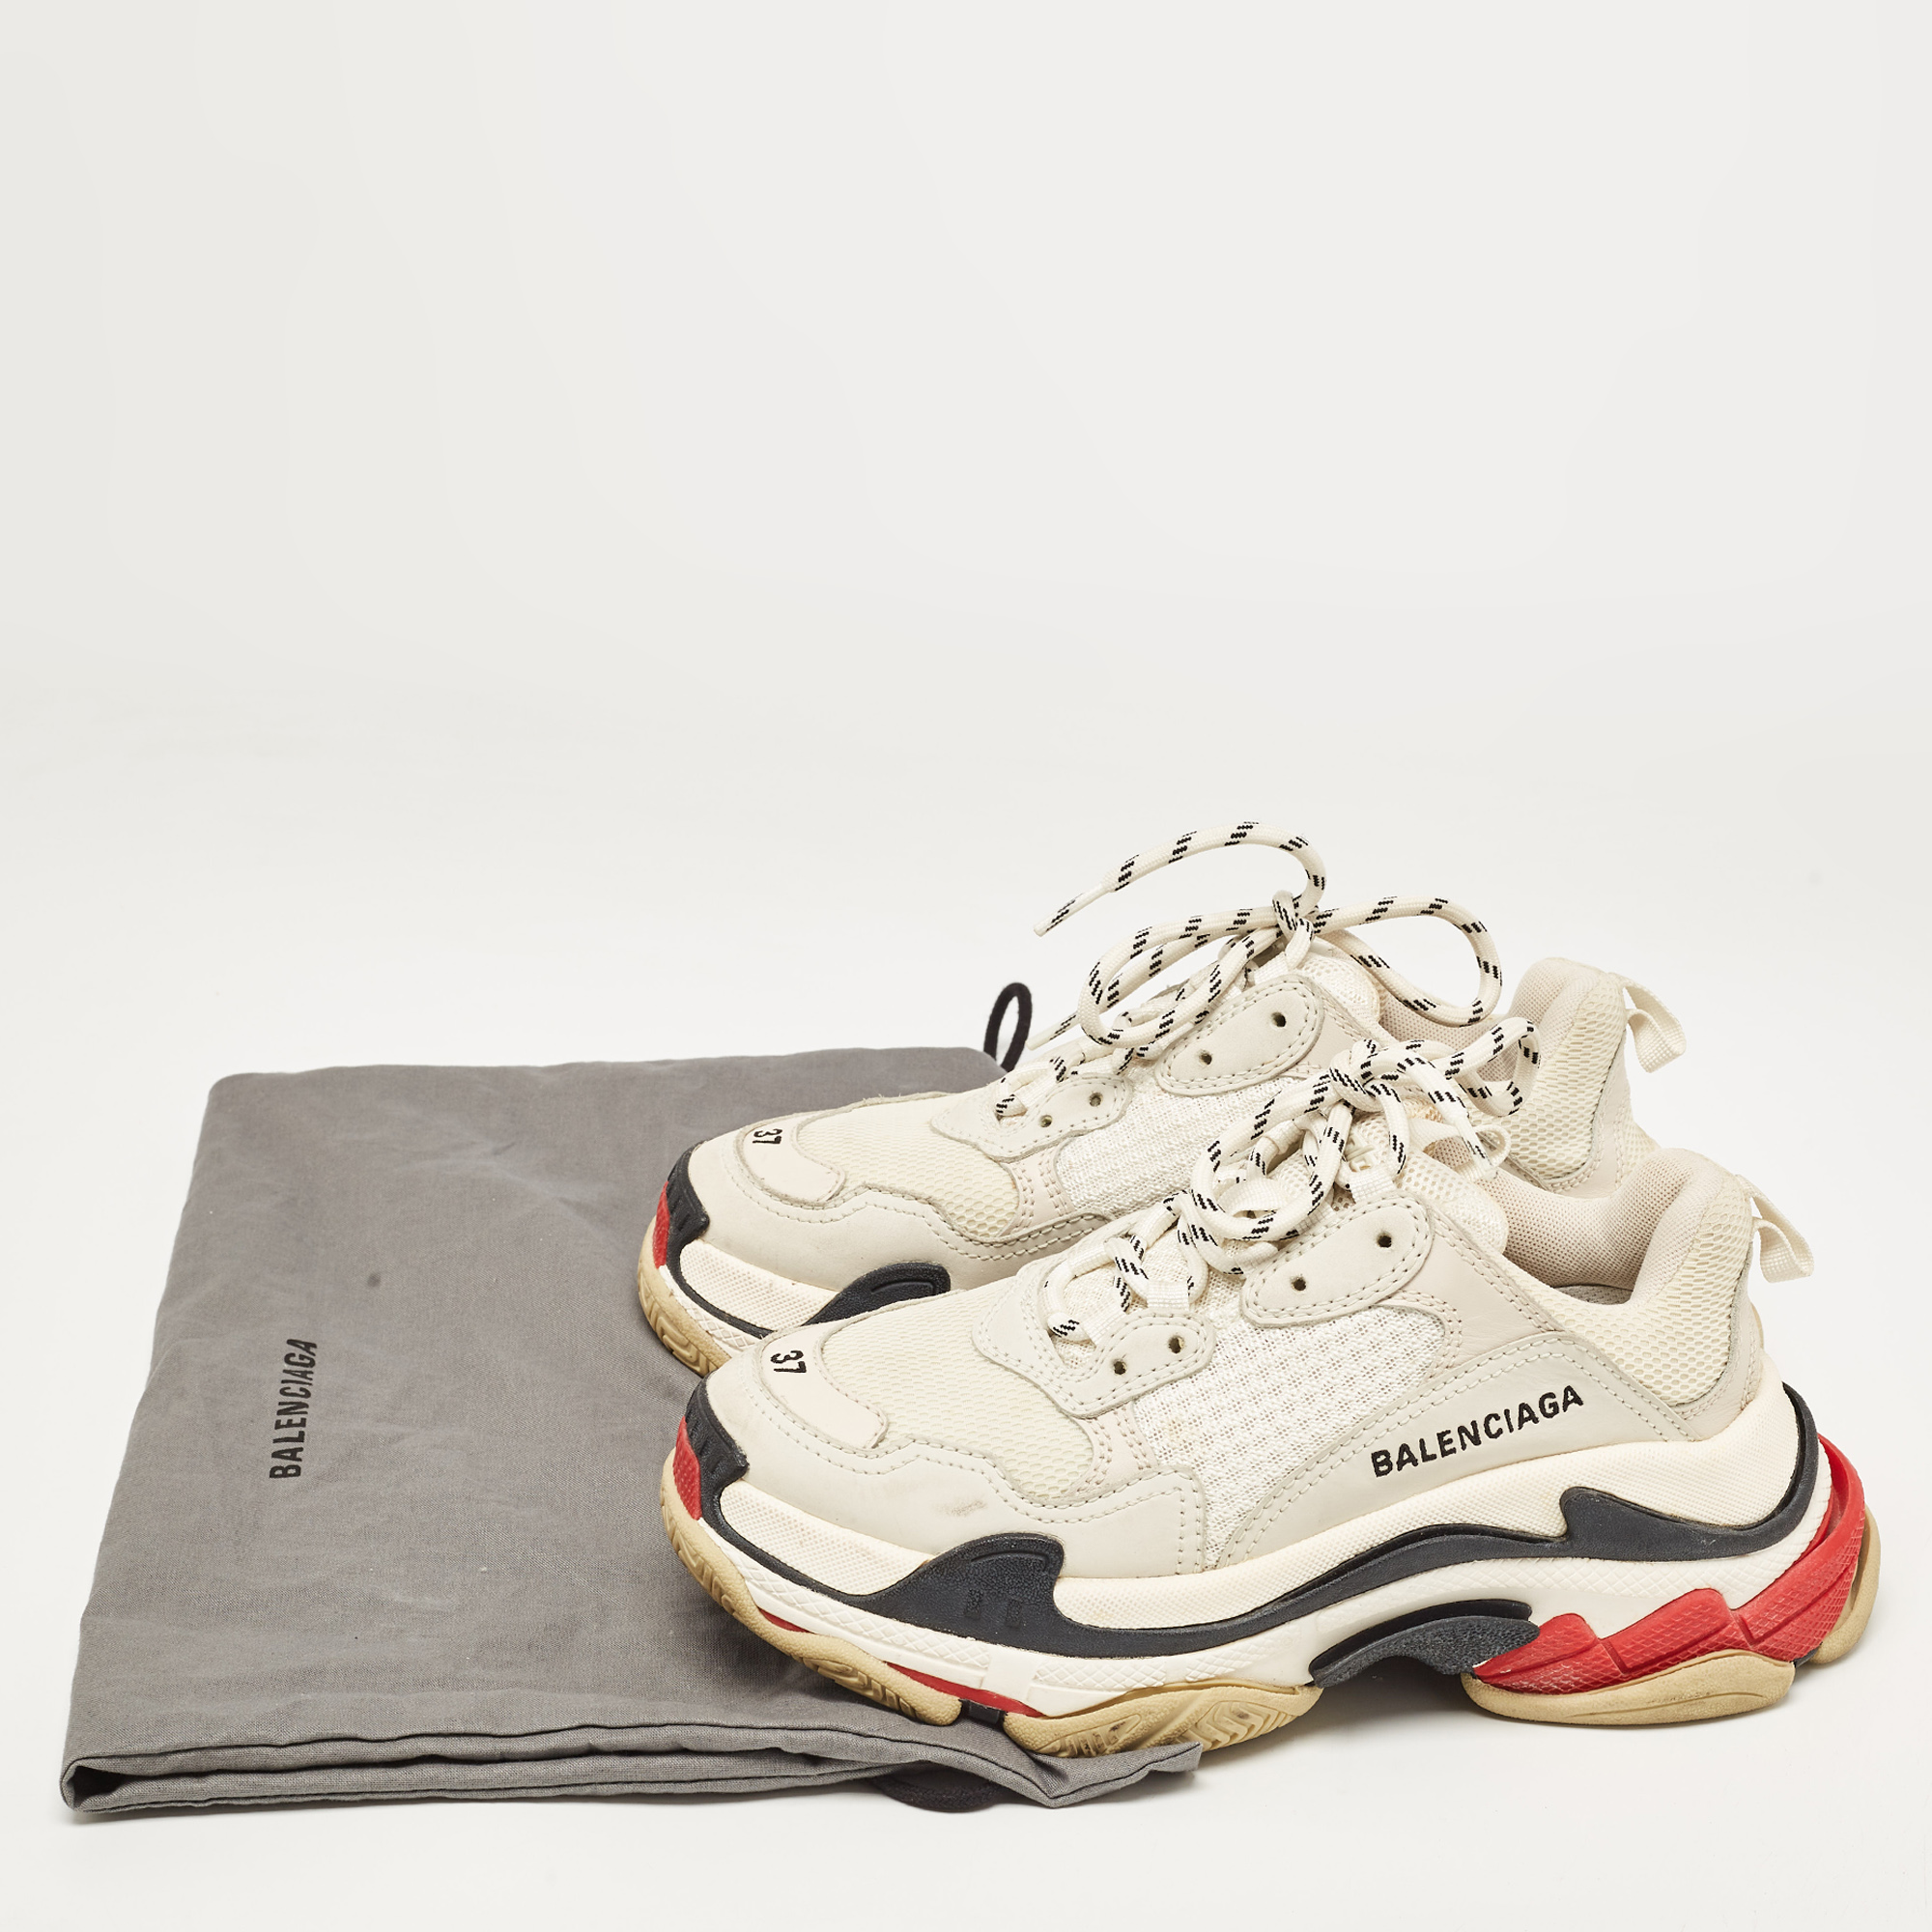 Balenciaga Multicolor Mesh And Nubuck Leather Triple S Low Top Sneakers Size 37